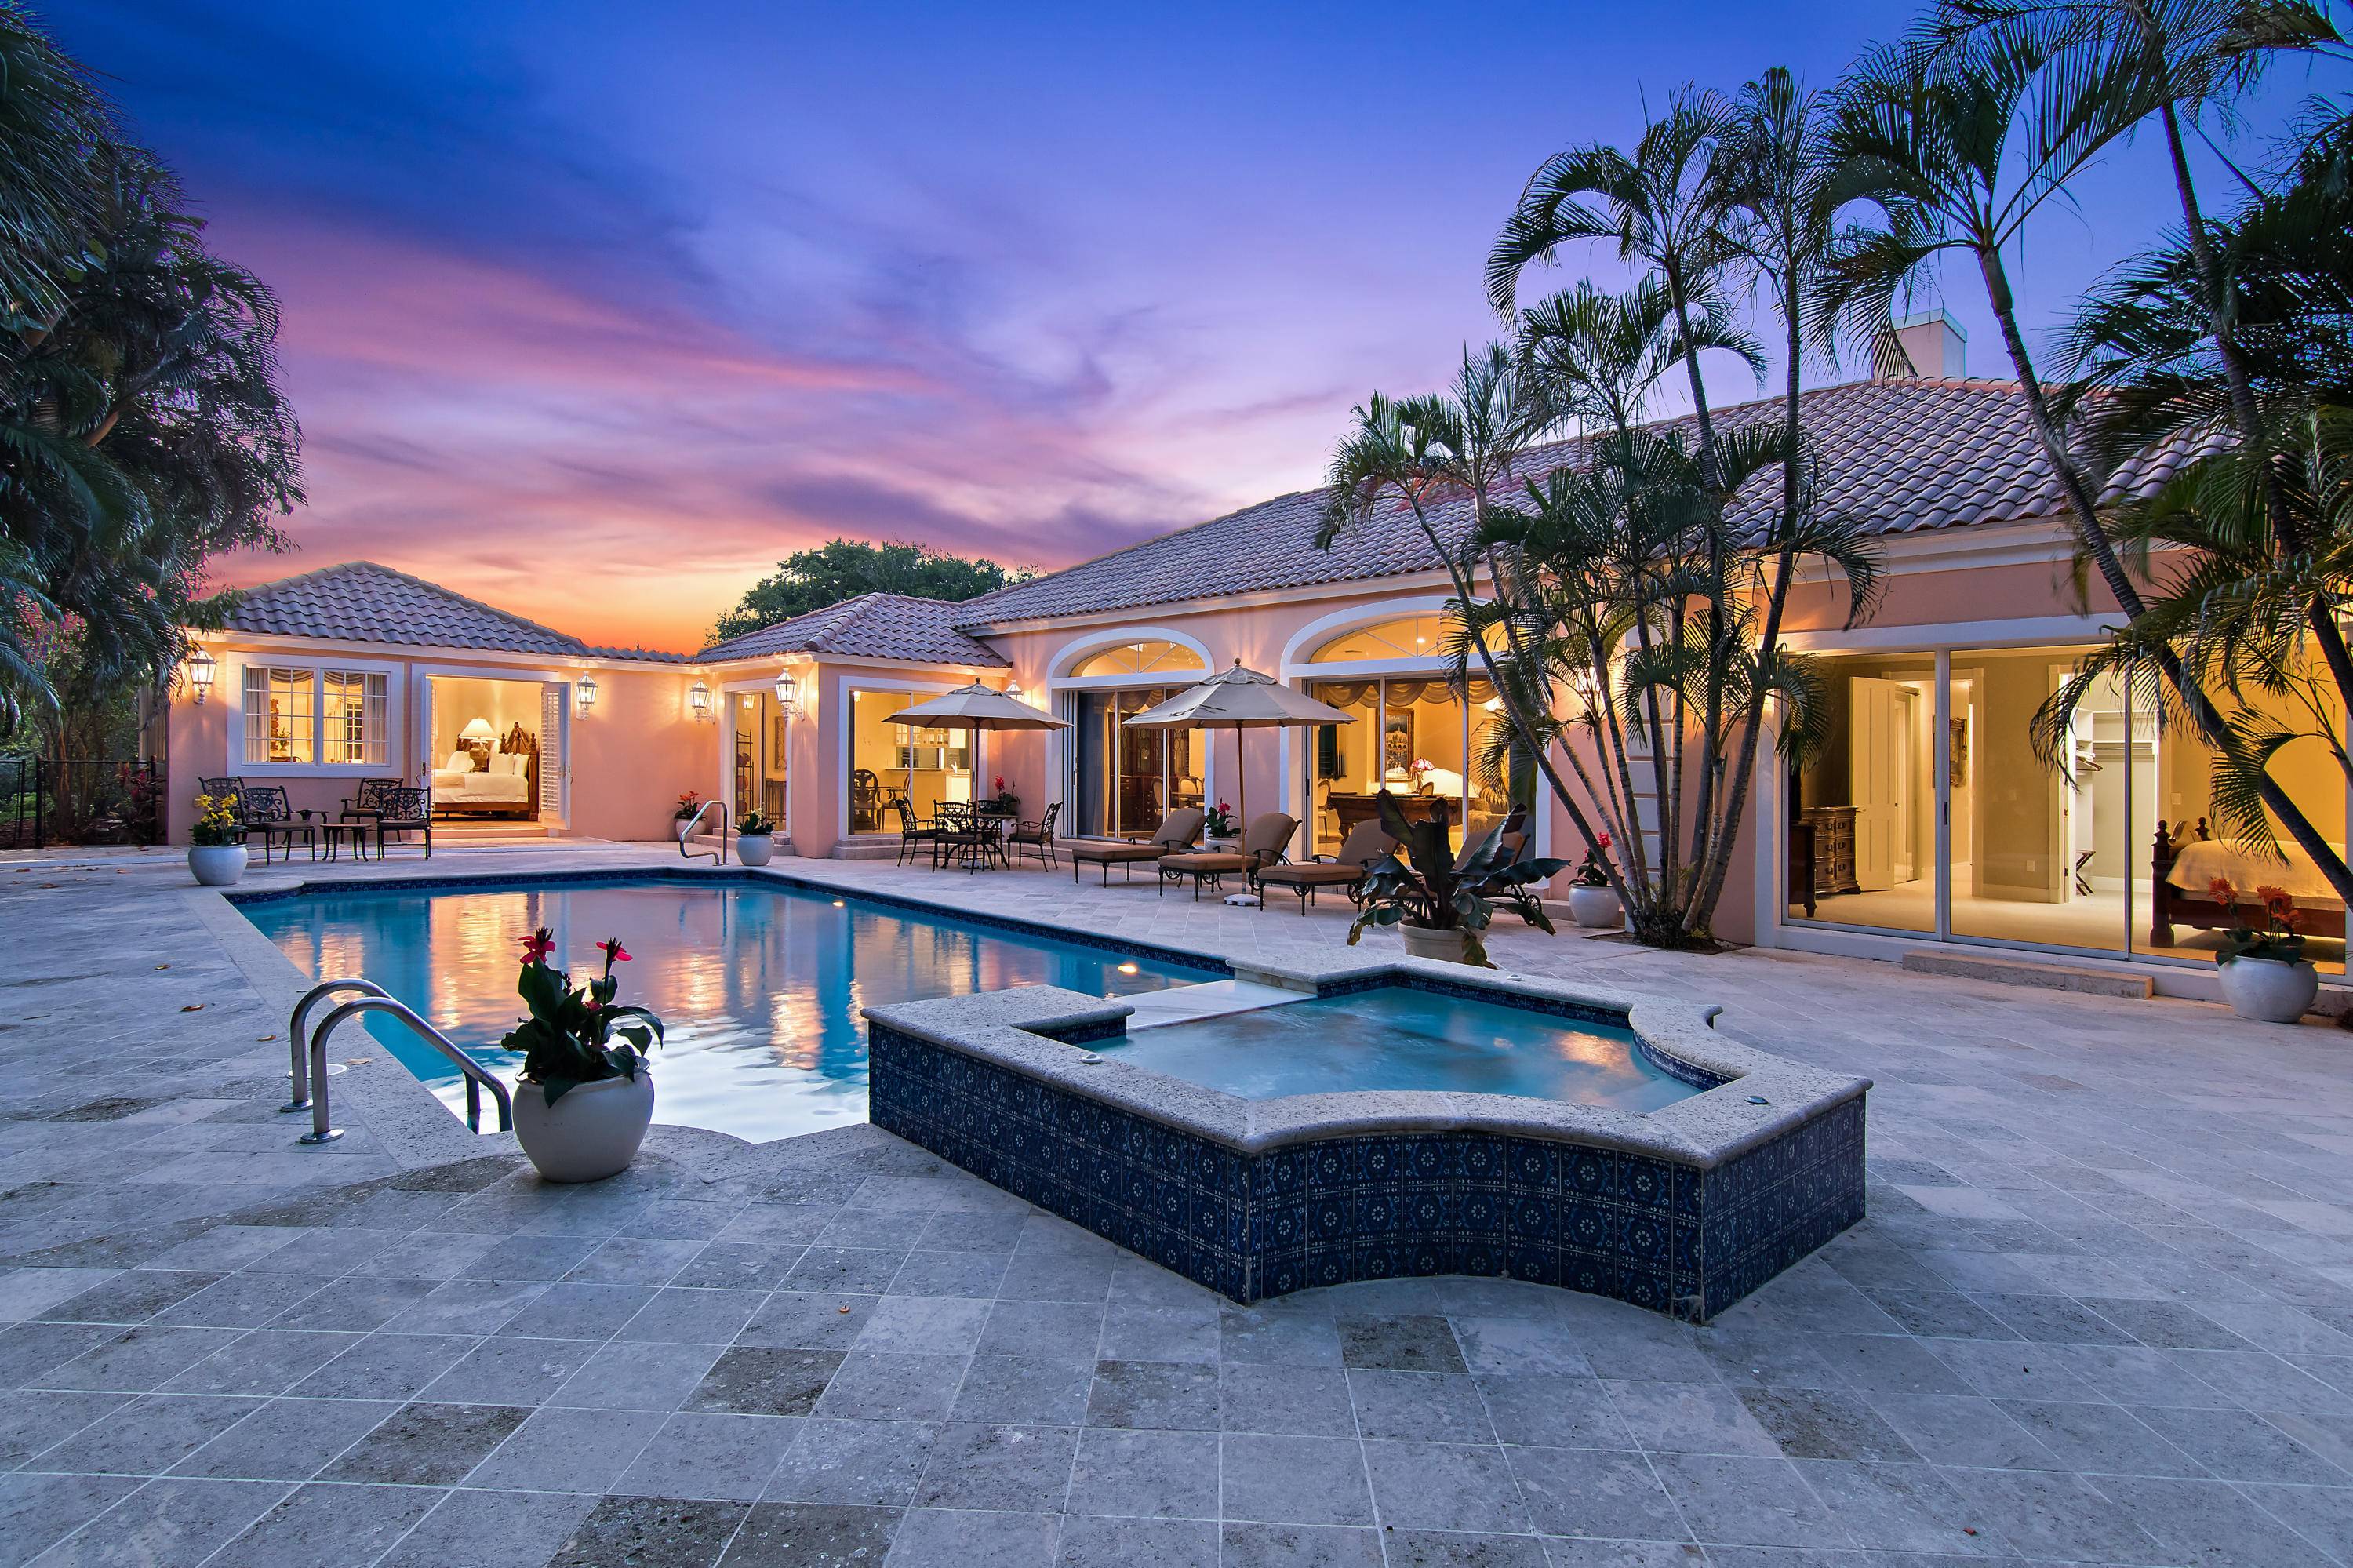 Stunning Palm Beach home located adjacent to the exclusive Mar A Lago Club.